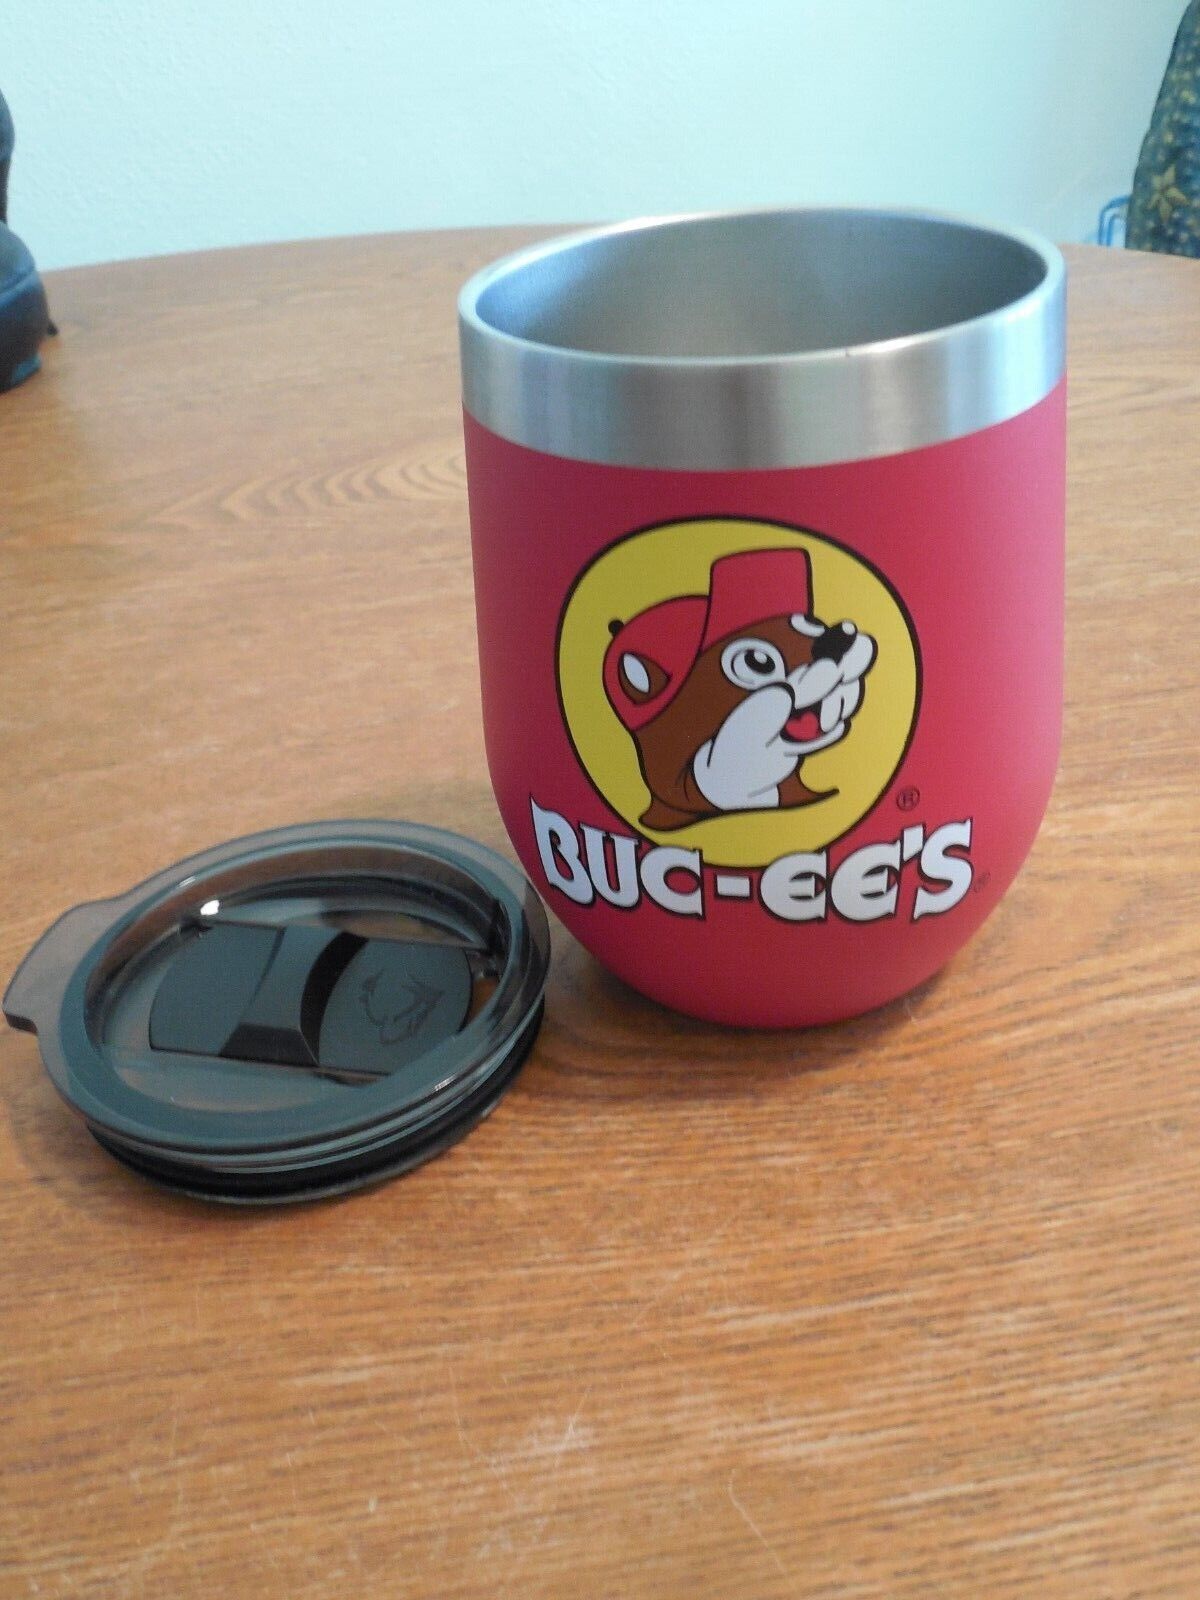 VINTAGE BUC-EE'S METAL CUP/GLASS WITH TRAVEL LID, NEW